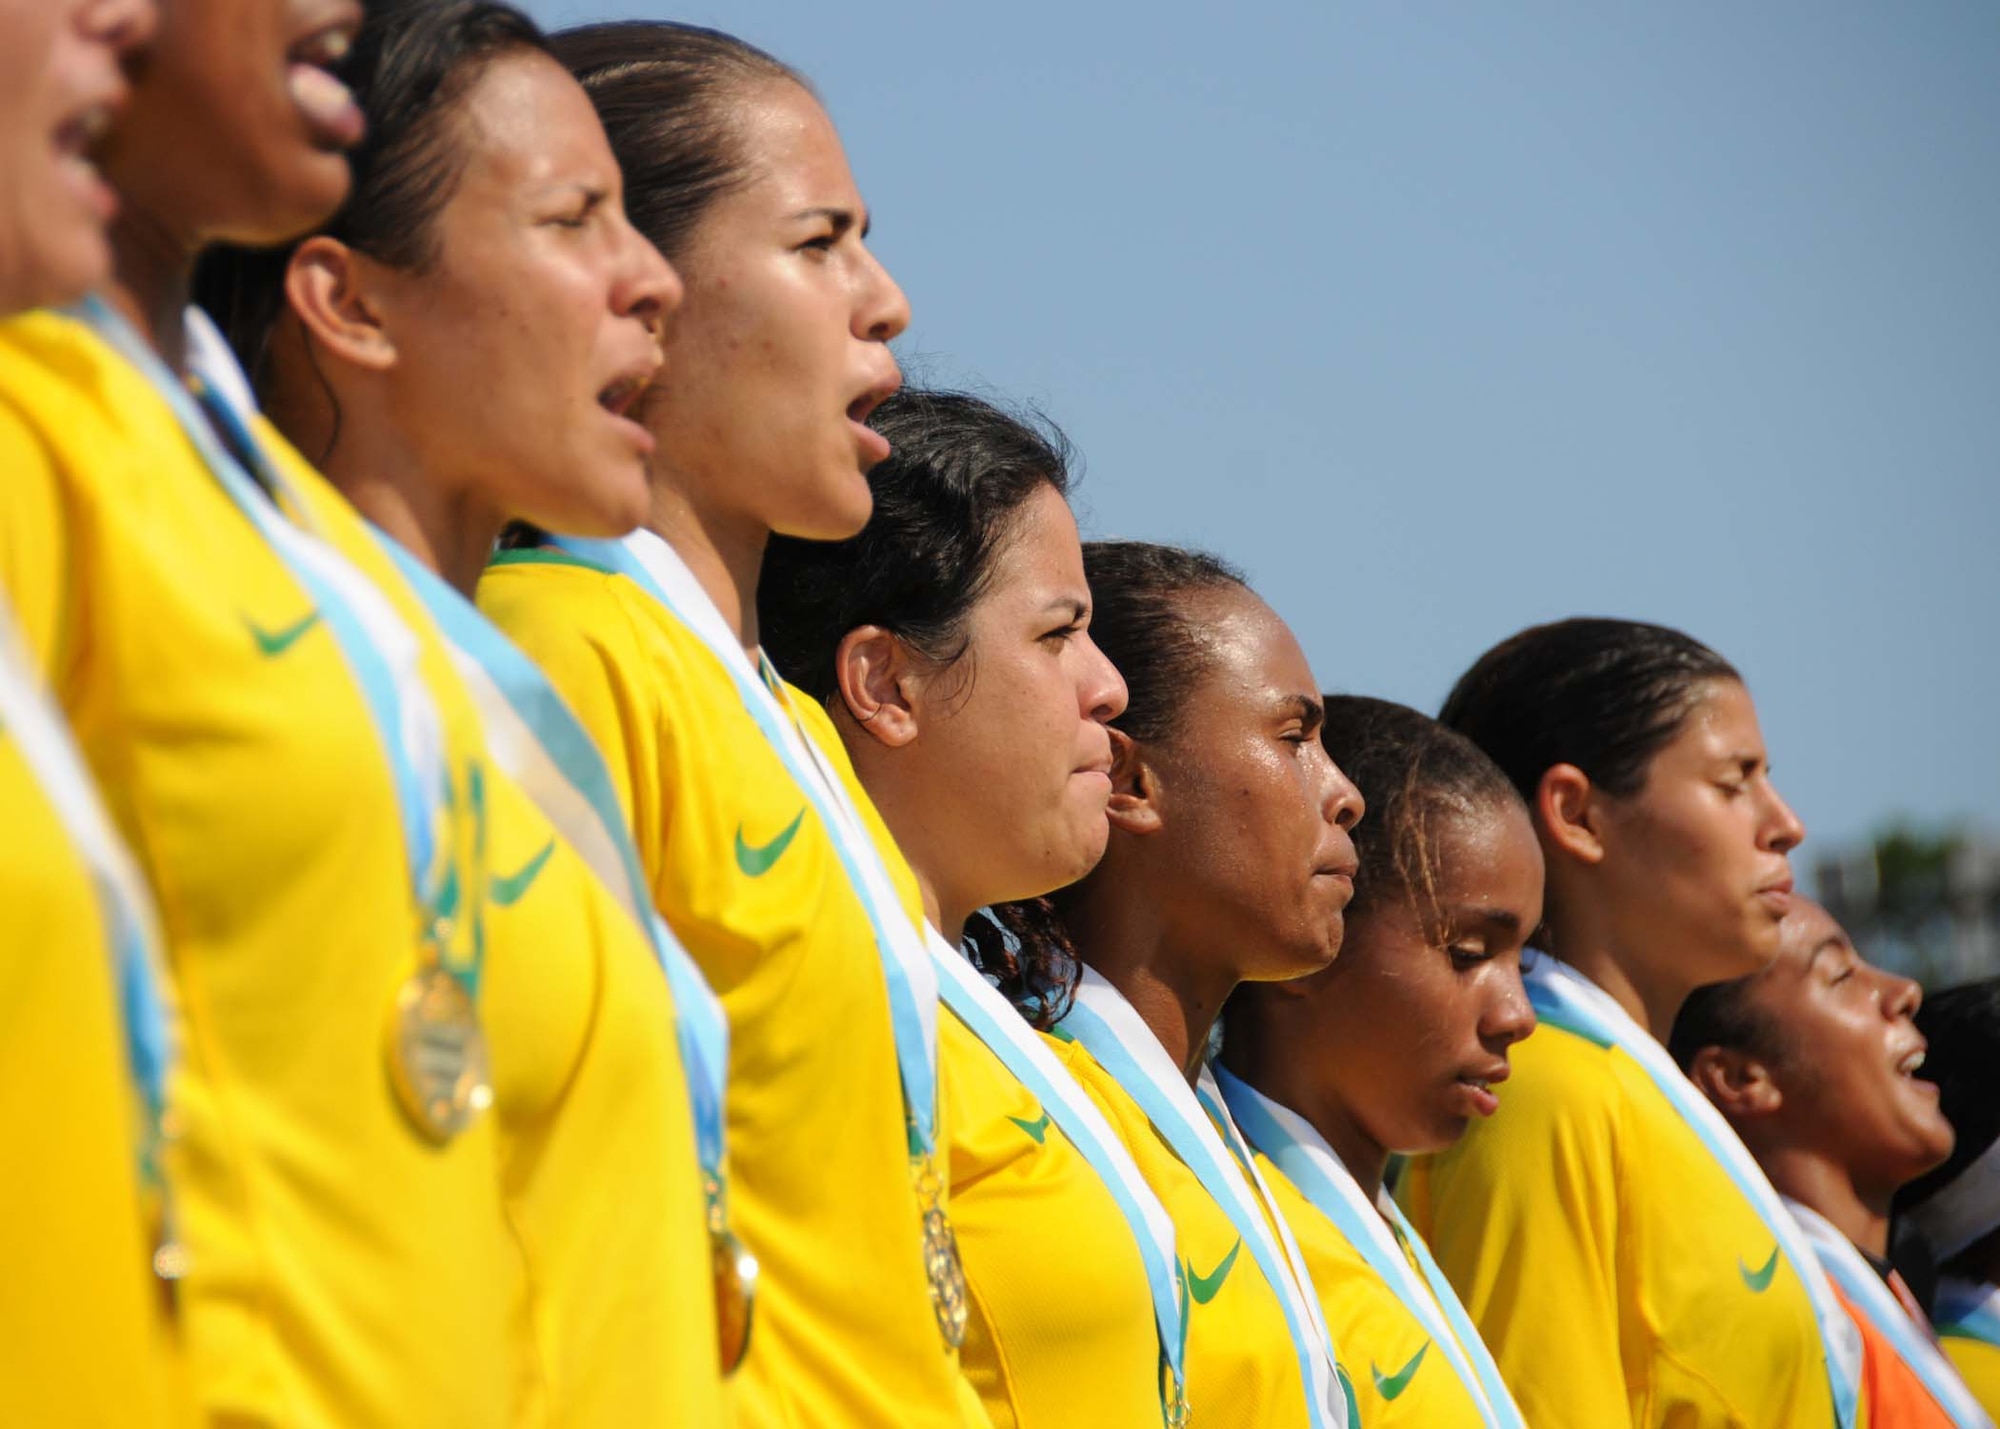 Brazil won the gold medal over the Republic of Korea, 1-0, in the championship game of the 5th CISM Women’s Soccer Championship at the Biloxi High Stadium, June 13.  The Netherlands won the bronze medal.  The CISM tournament, hosted by Keesler Air Force Base, also included teams from Germany, Canada, France and the United States.   (U.S. Air Force photo by Kemberly Groue)